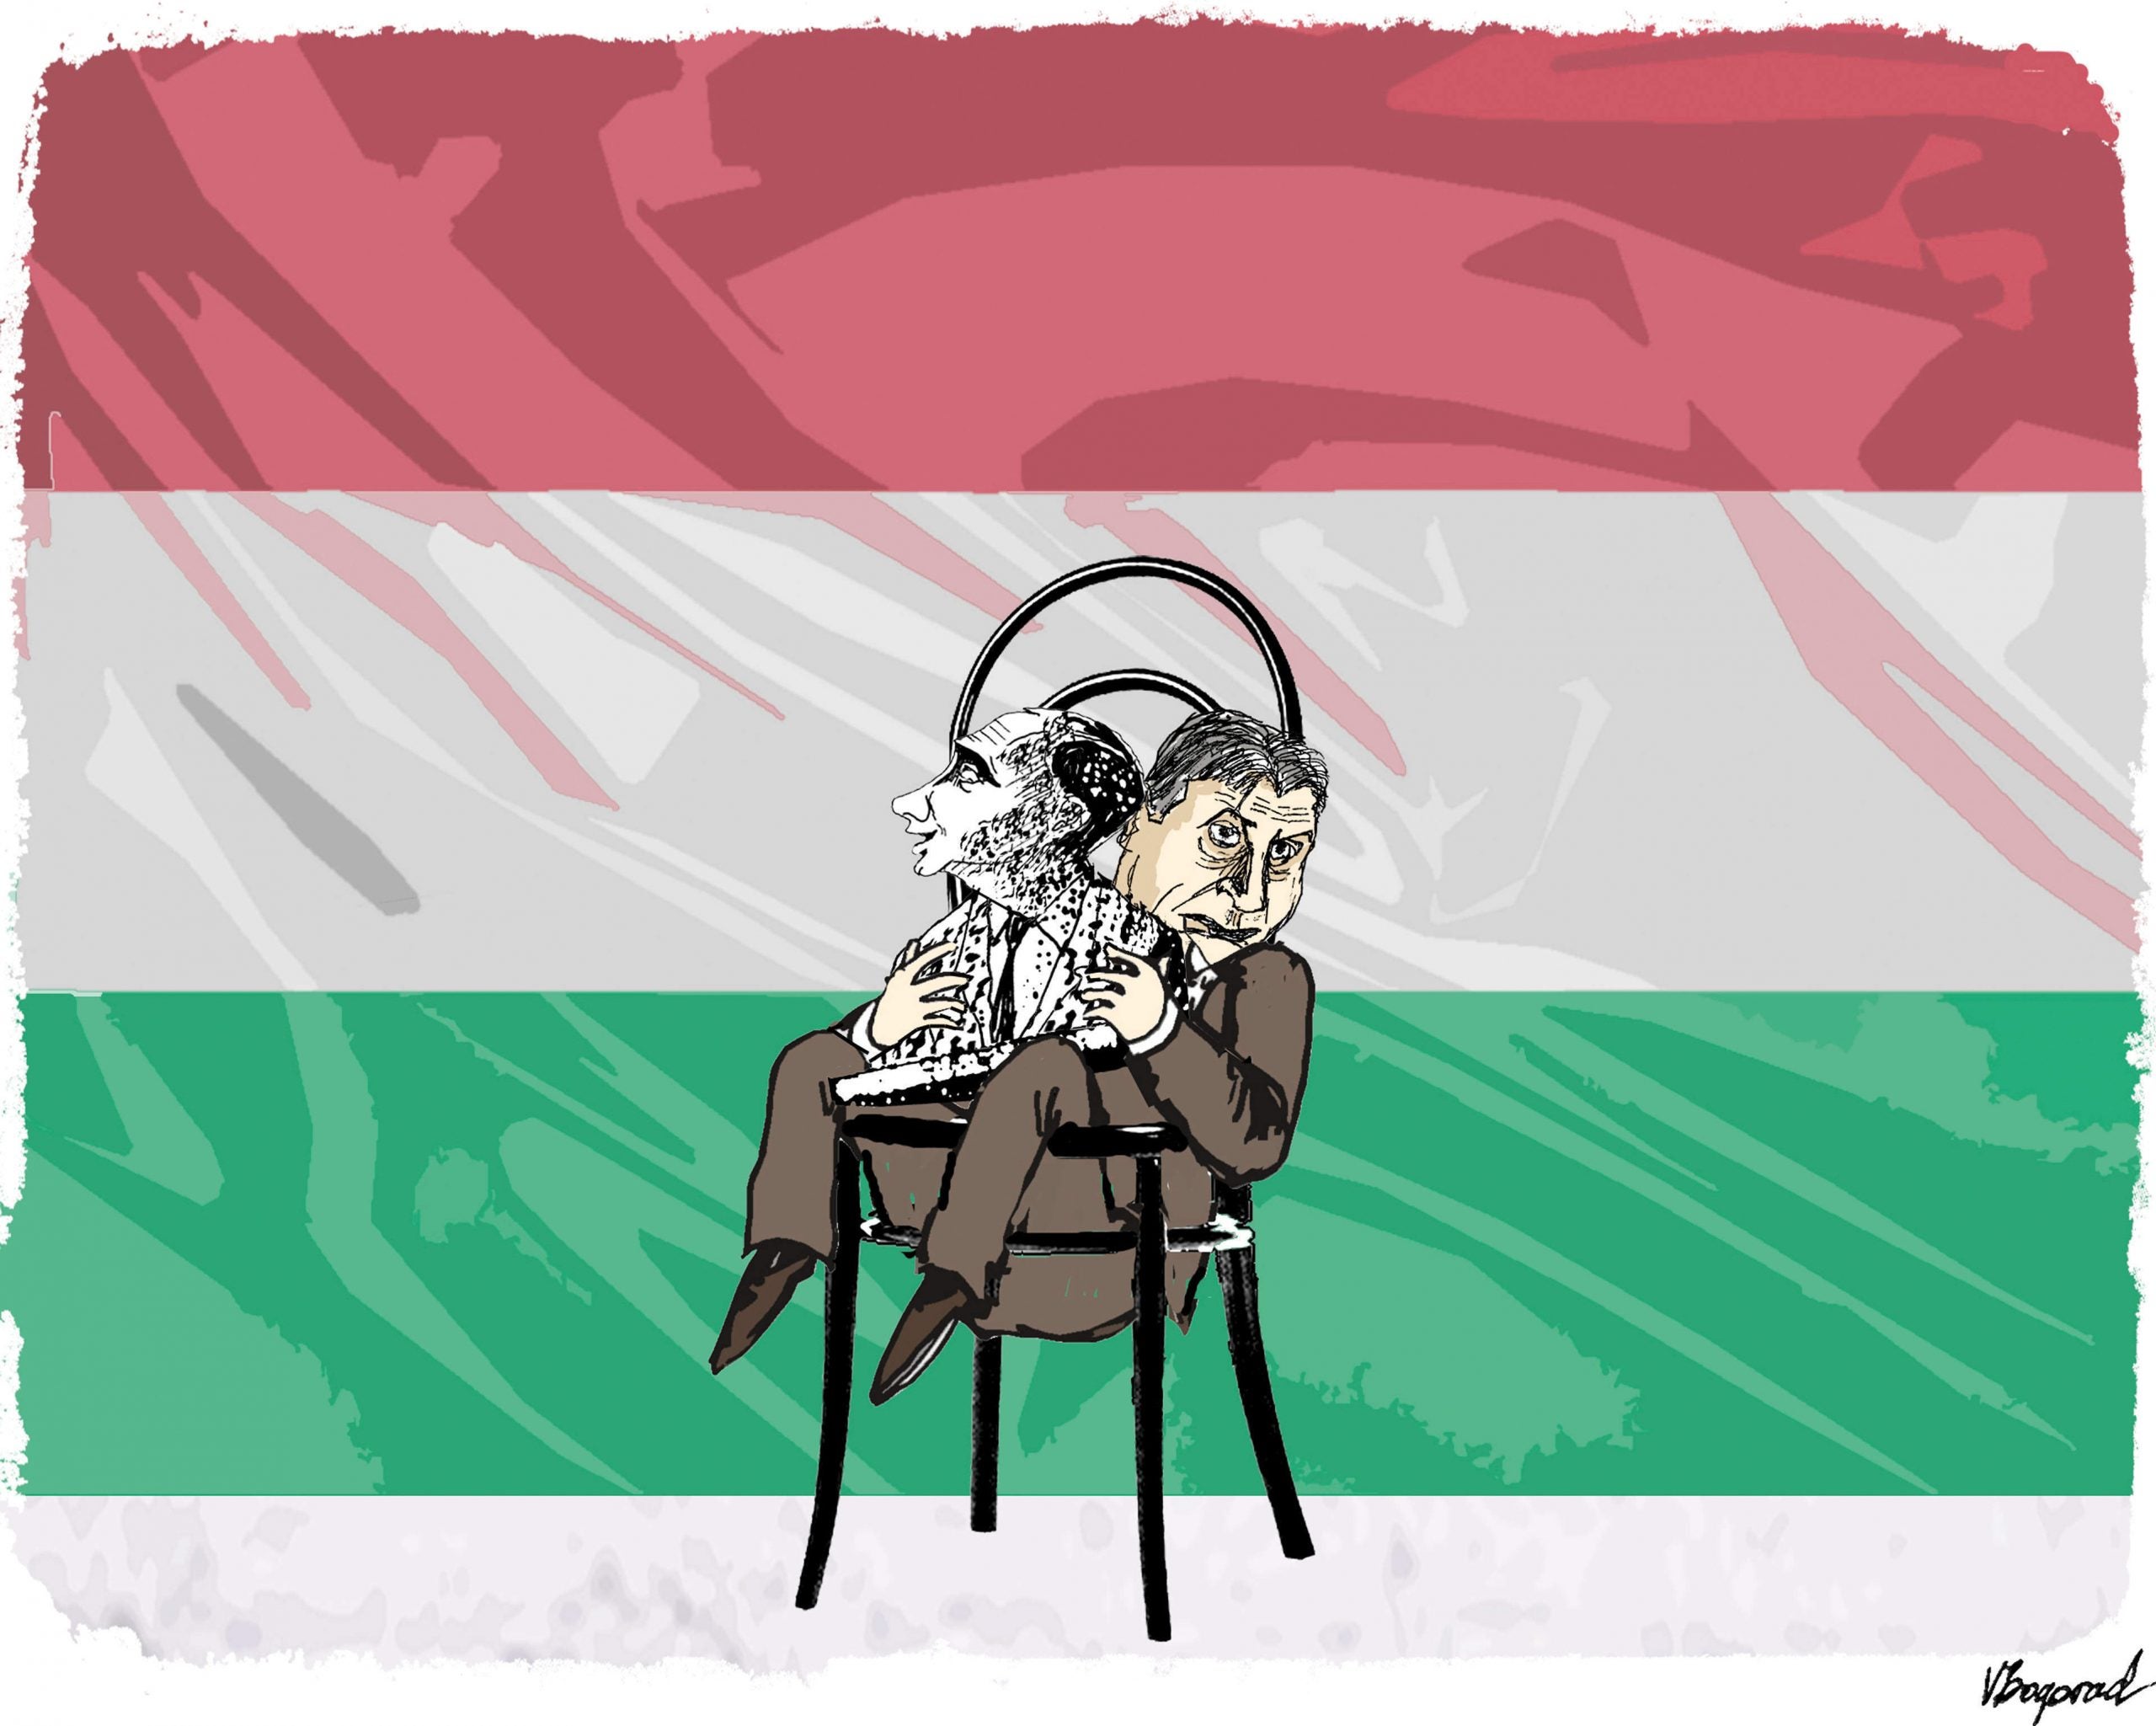 Is Hungary the EU’s first rogue state? Viktor Orban and the long march from freedom